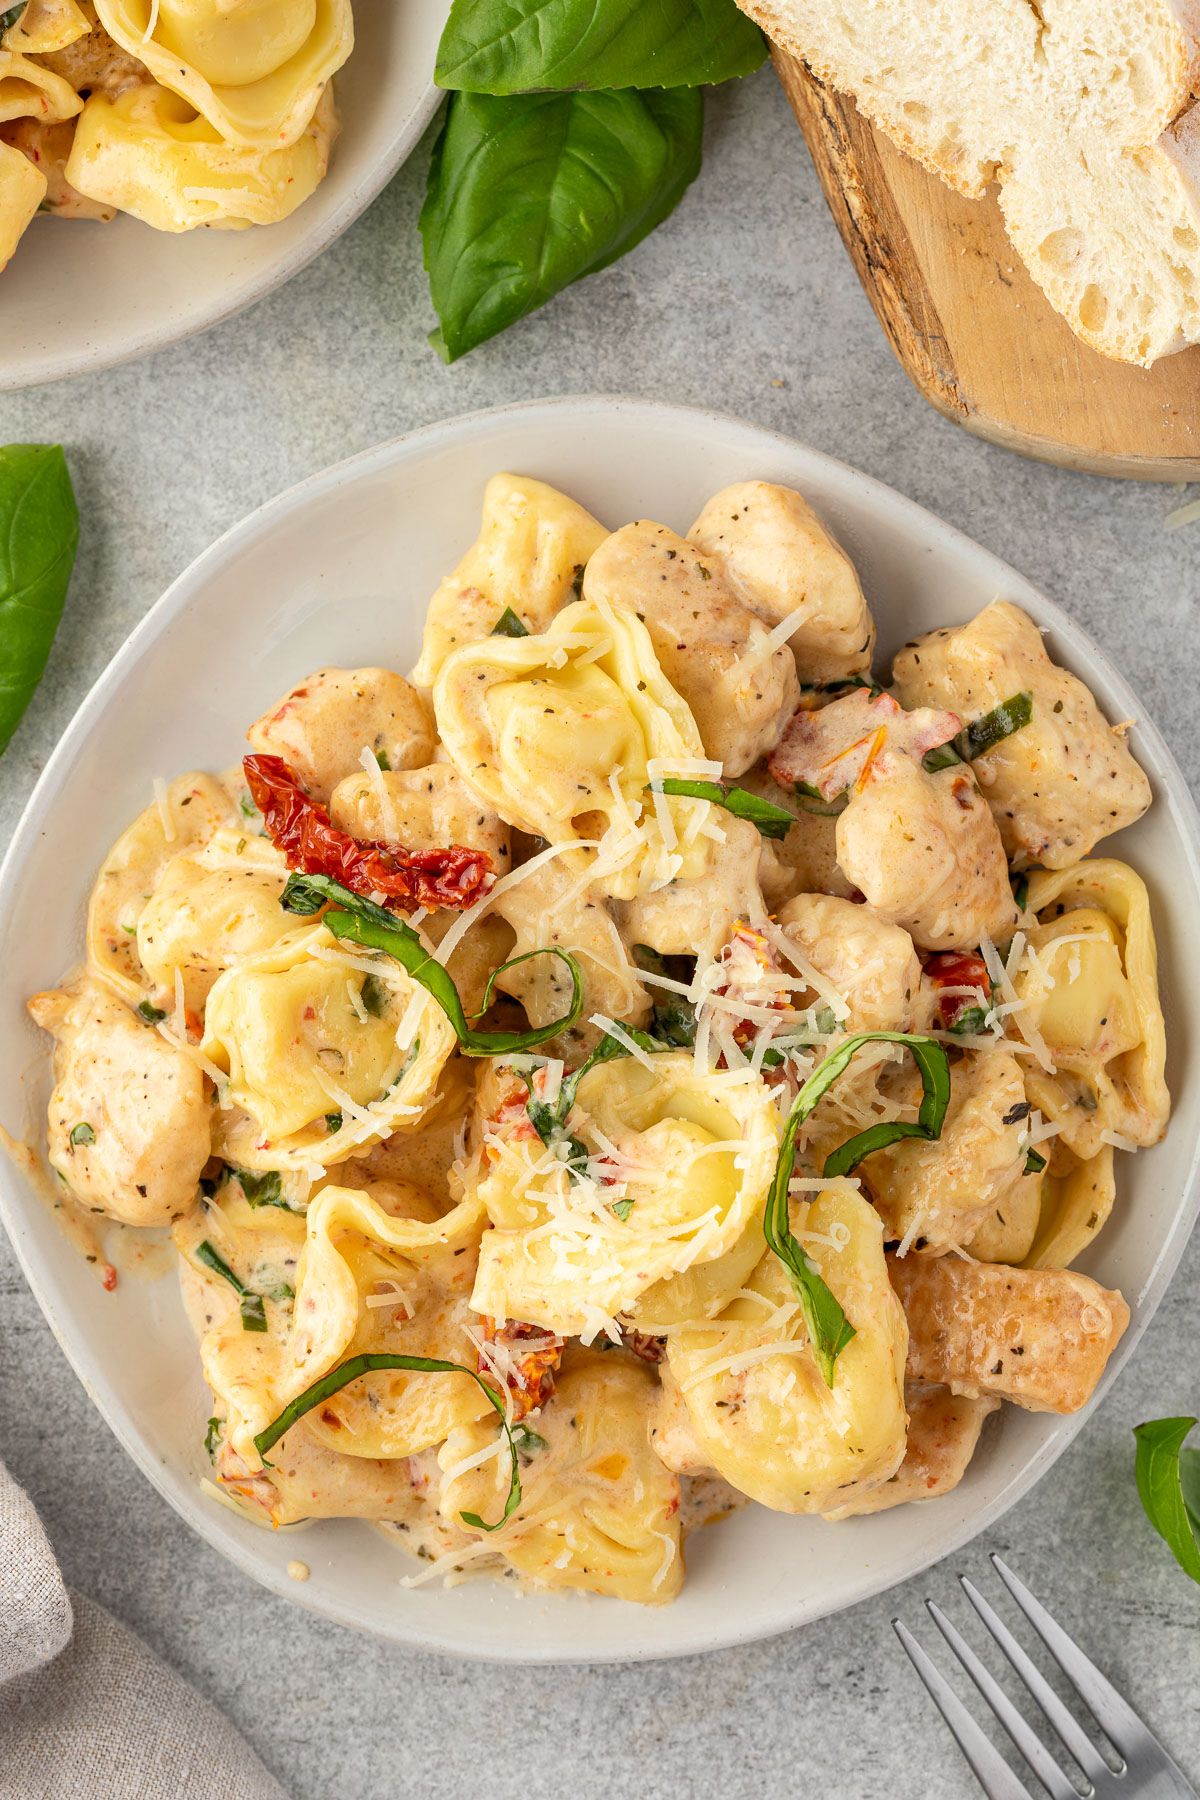 A serving of cheese tortellini and chicken in a marry me sauce on a plate, with bread in one corner and another serving on a plate in another.